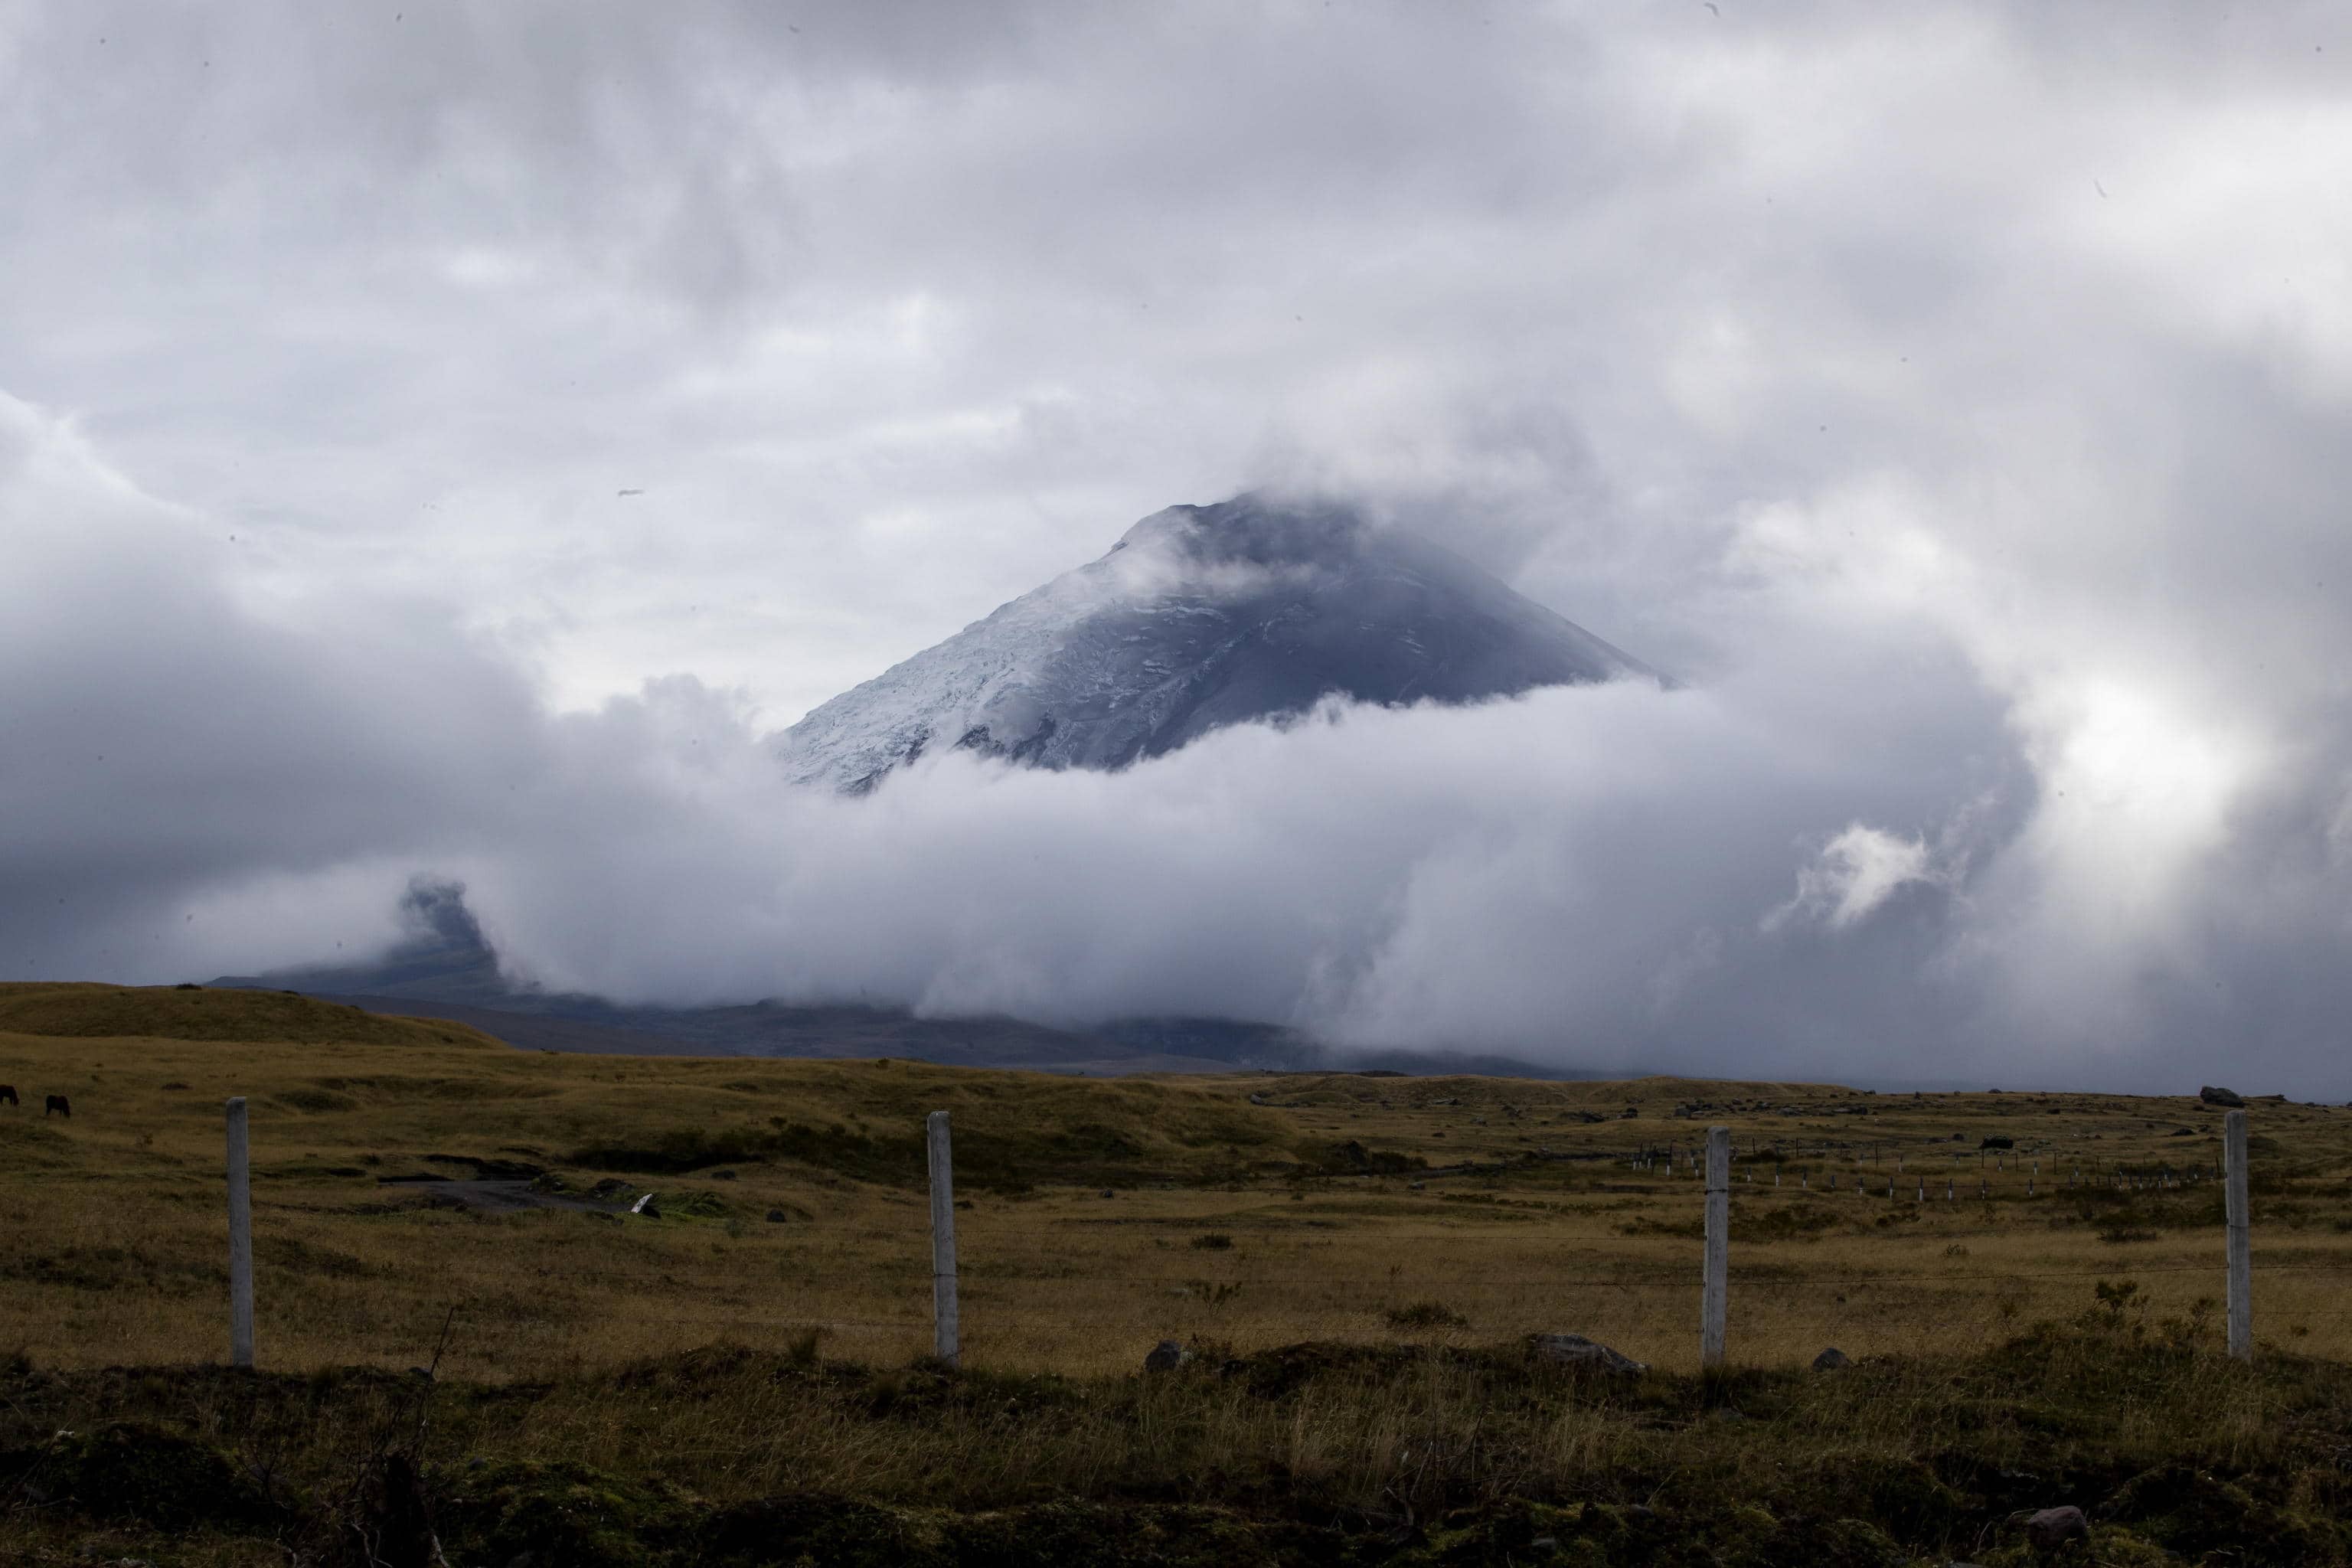 epa10330744 The Cotopaxi volcano, in the cantons of Quito and Mejia, in the province of Pichincha, Ecuador, 26 November 2022. A slight ash fall from the Cotopaxi volcano was recorded this 26 November in the Quito and Mejía cantons, in the Ecuadorian province of Pichincha, reported the National Risk and Emergency Management Service of Ecuador. In his social networks, he explained that the fall of volcanic dust was reported in the parishes of Quitumbe, Guamaní, La Merced, Amaguaña, as well as in San Juan, the Historic Center, La Mena, Chillogallo and La Ecuatoriana (south and center of Quito).  EPA/Jose Jacome